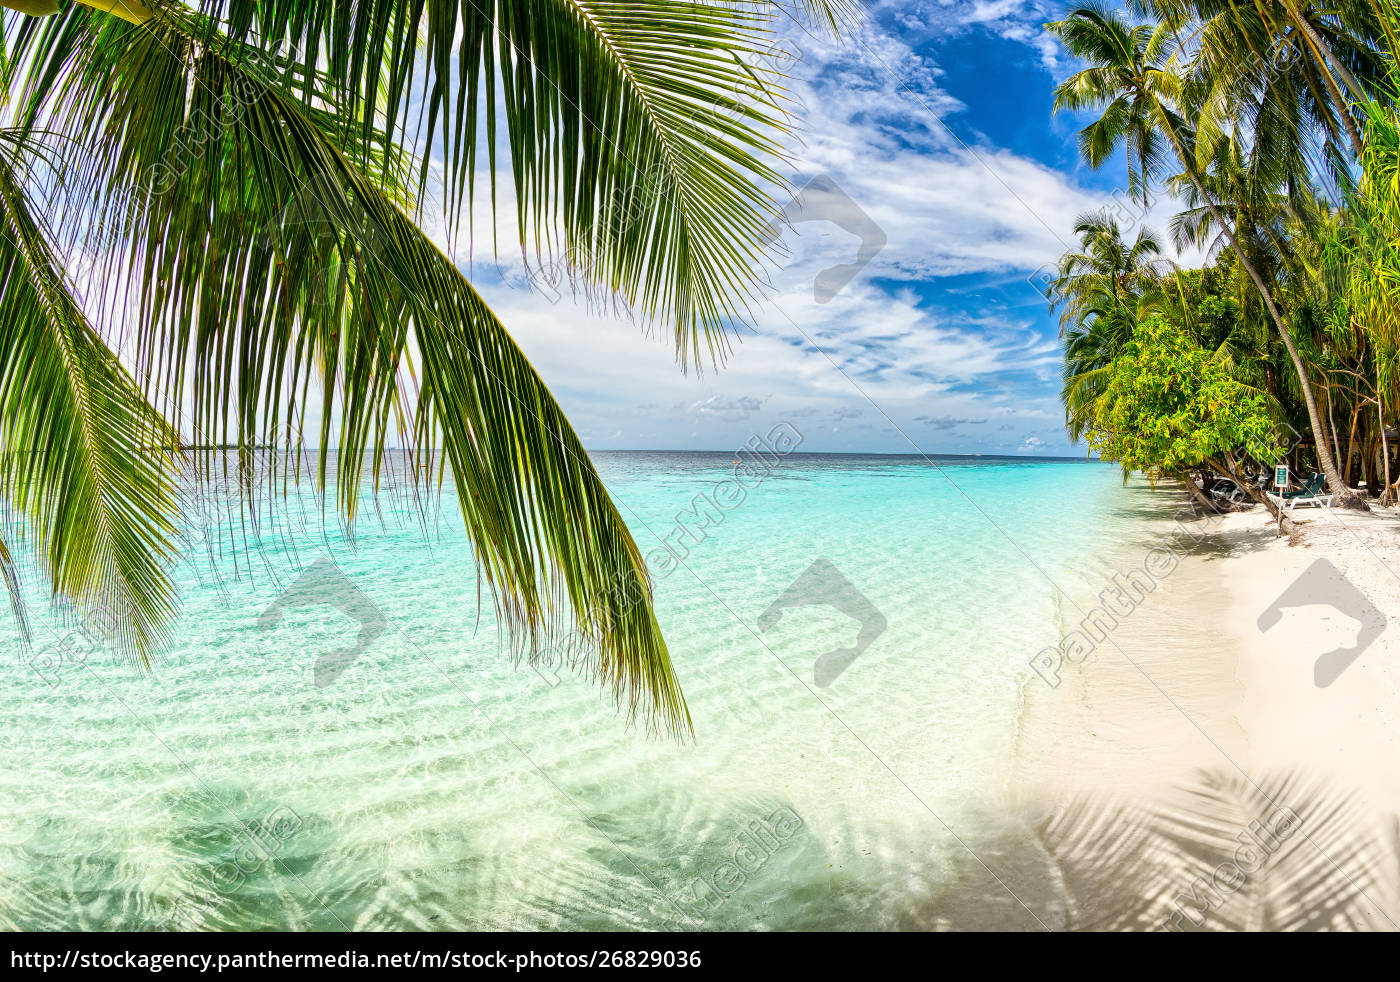 Tropical Paradise Beach White Sand And Coco Palms Royalty Free Photo Panthermedia Stock Agency